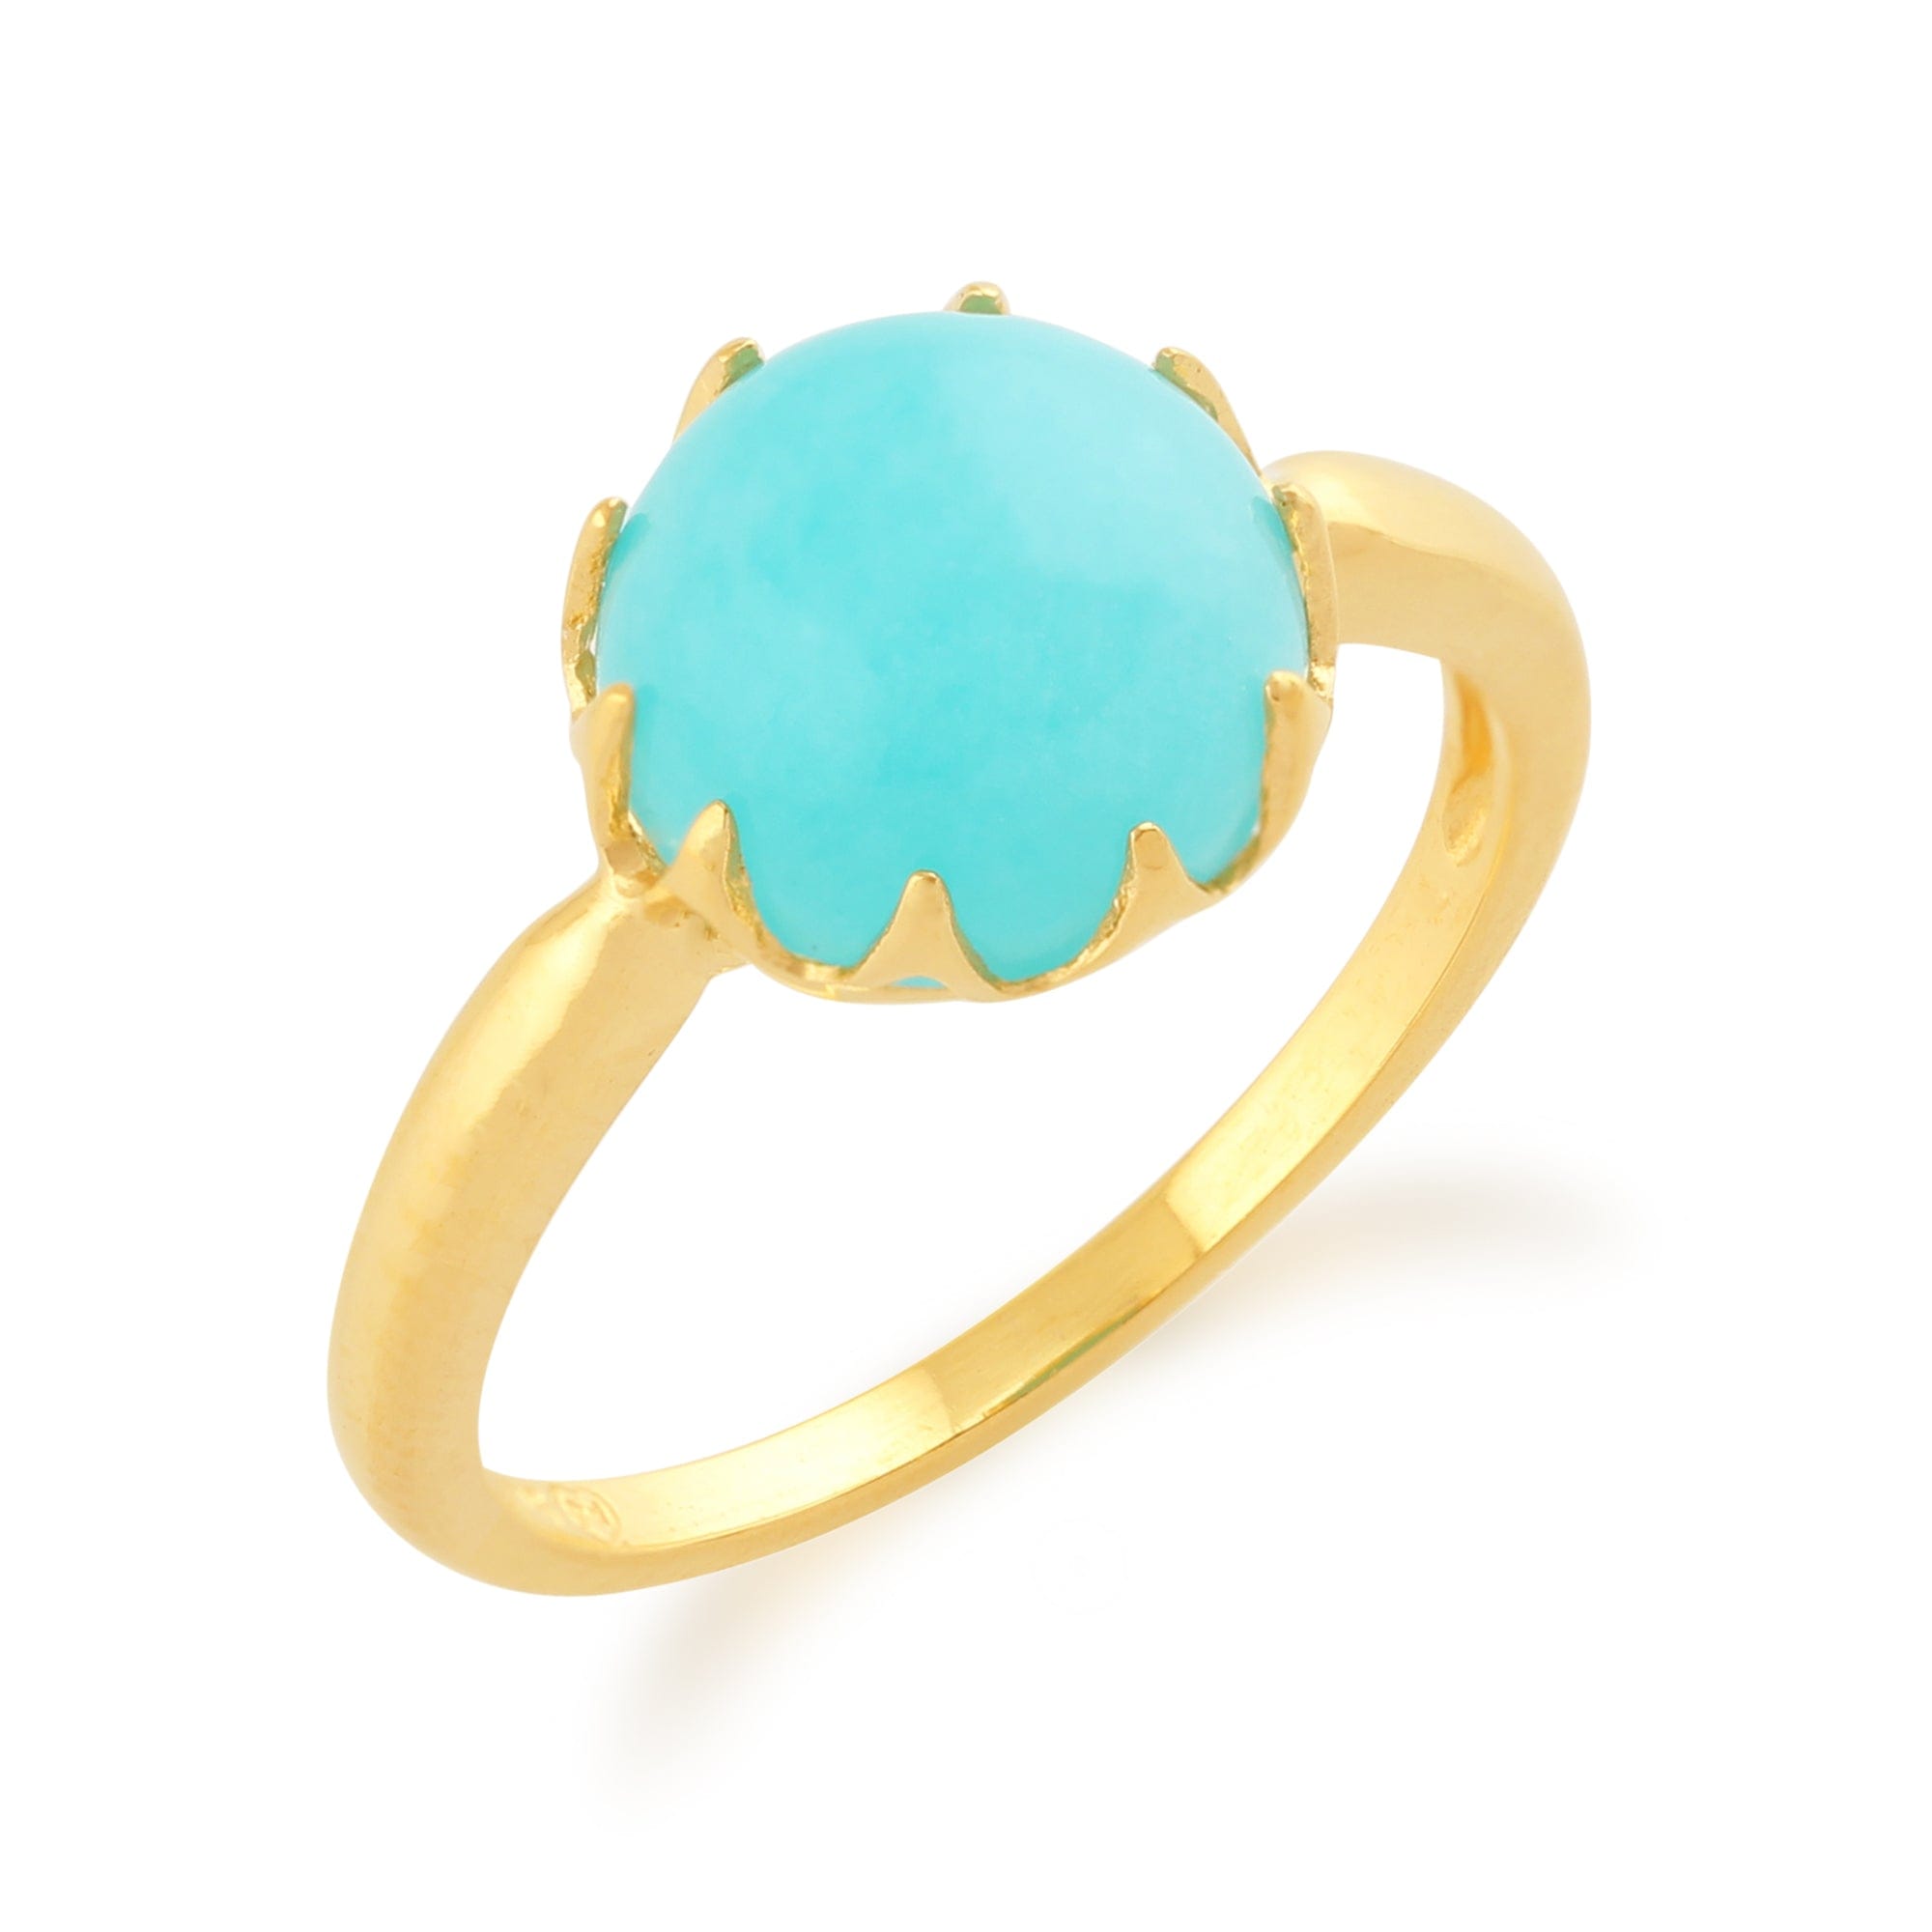 Amazonite 'Calo' Pastel Ring in 9ct Yellow Gold Plated Sterling Silver  Image 2